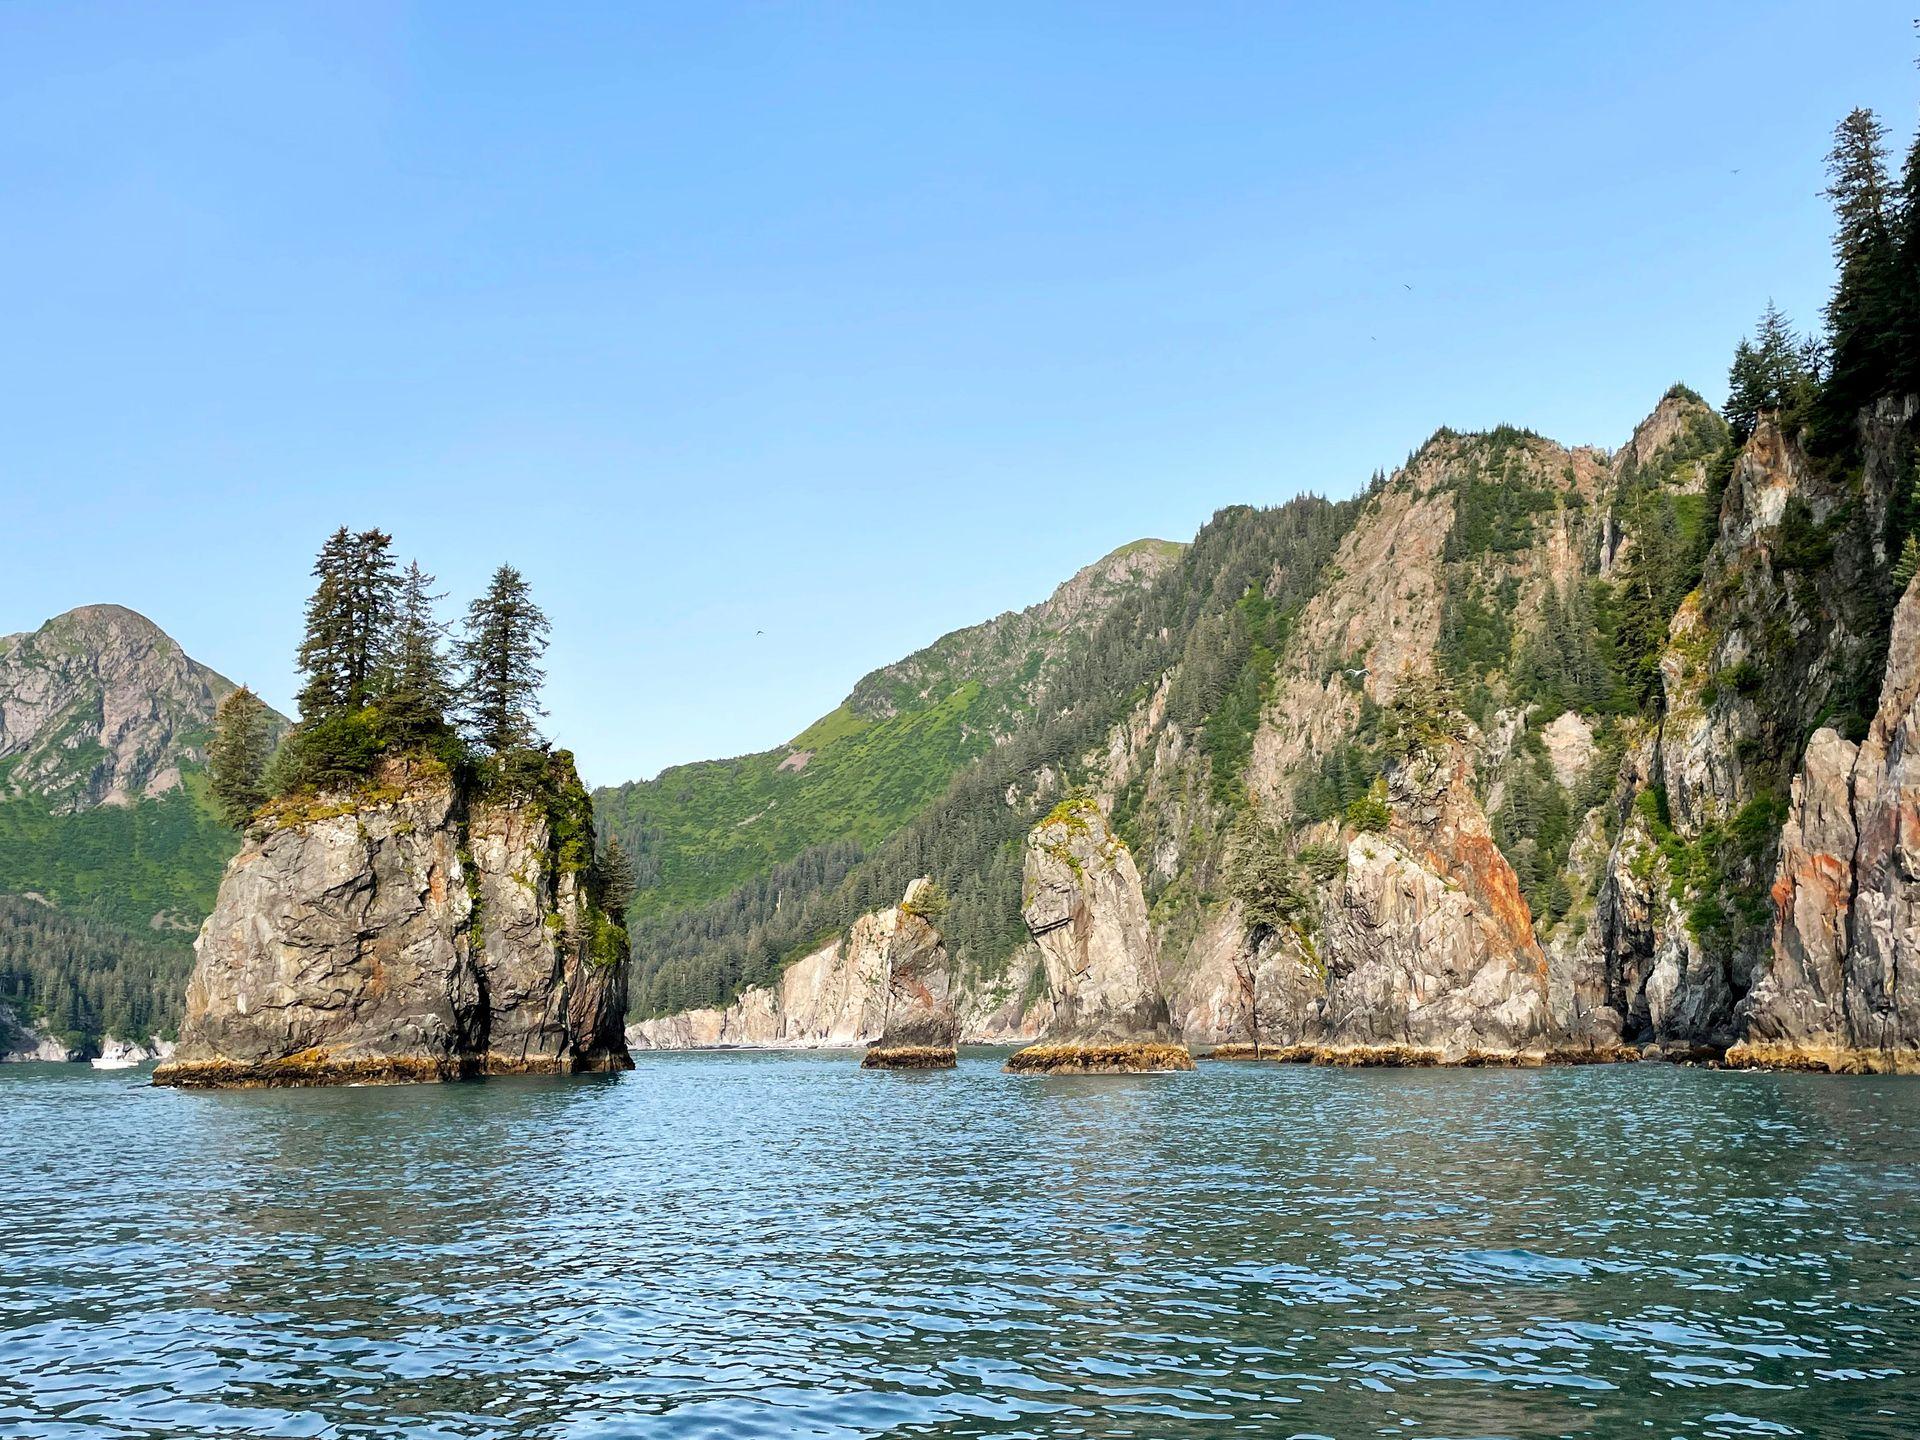 A view of the Cove of the Spires, jagged rock formations sticking out of the water, in Kenai Fjords National Park.